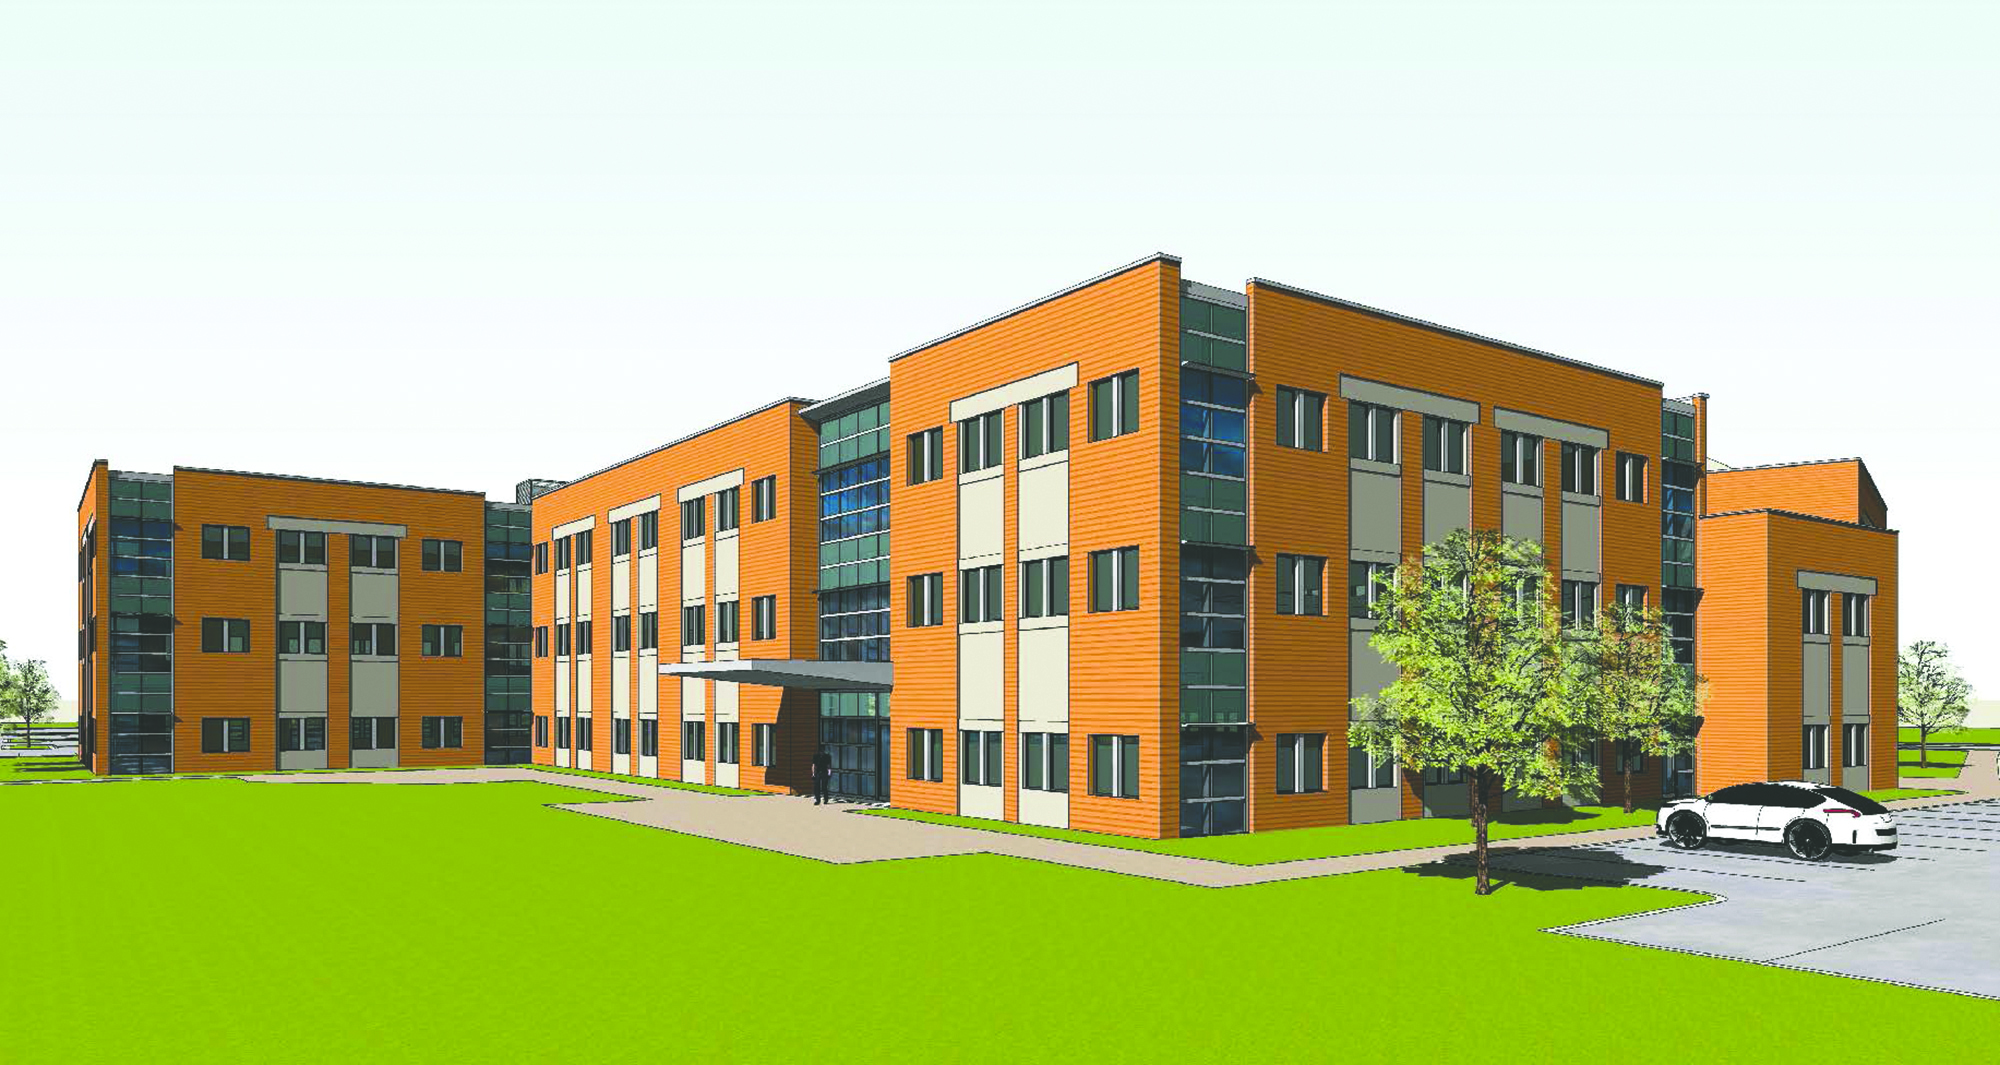 An artist’s rendering of the northwest view of the building. Construction is expected to be completed by fall 2019.